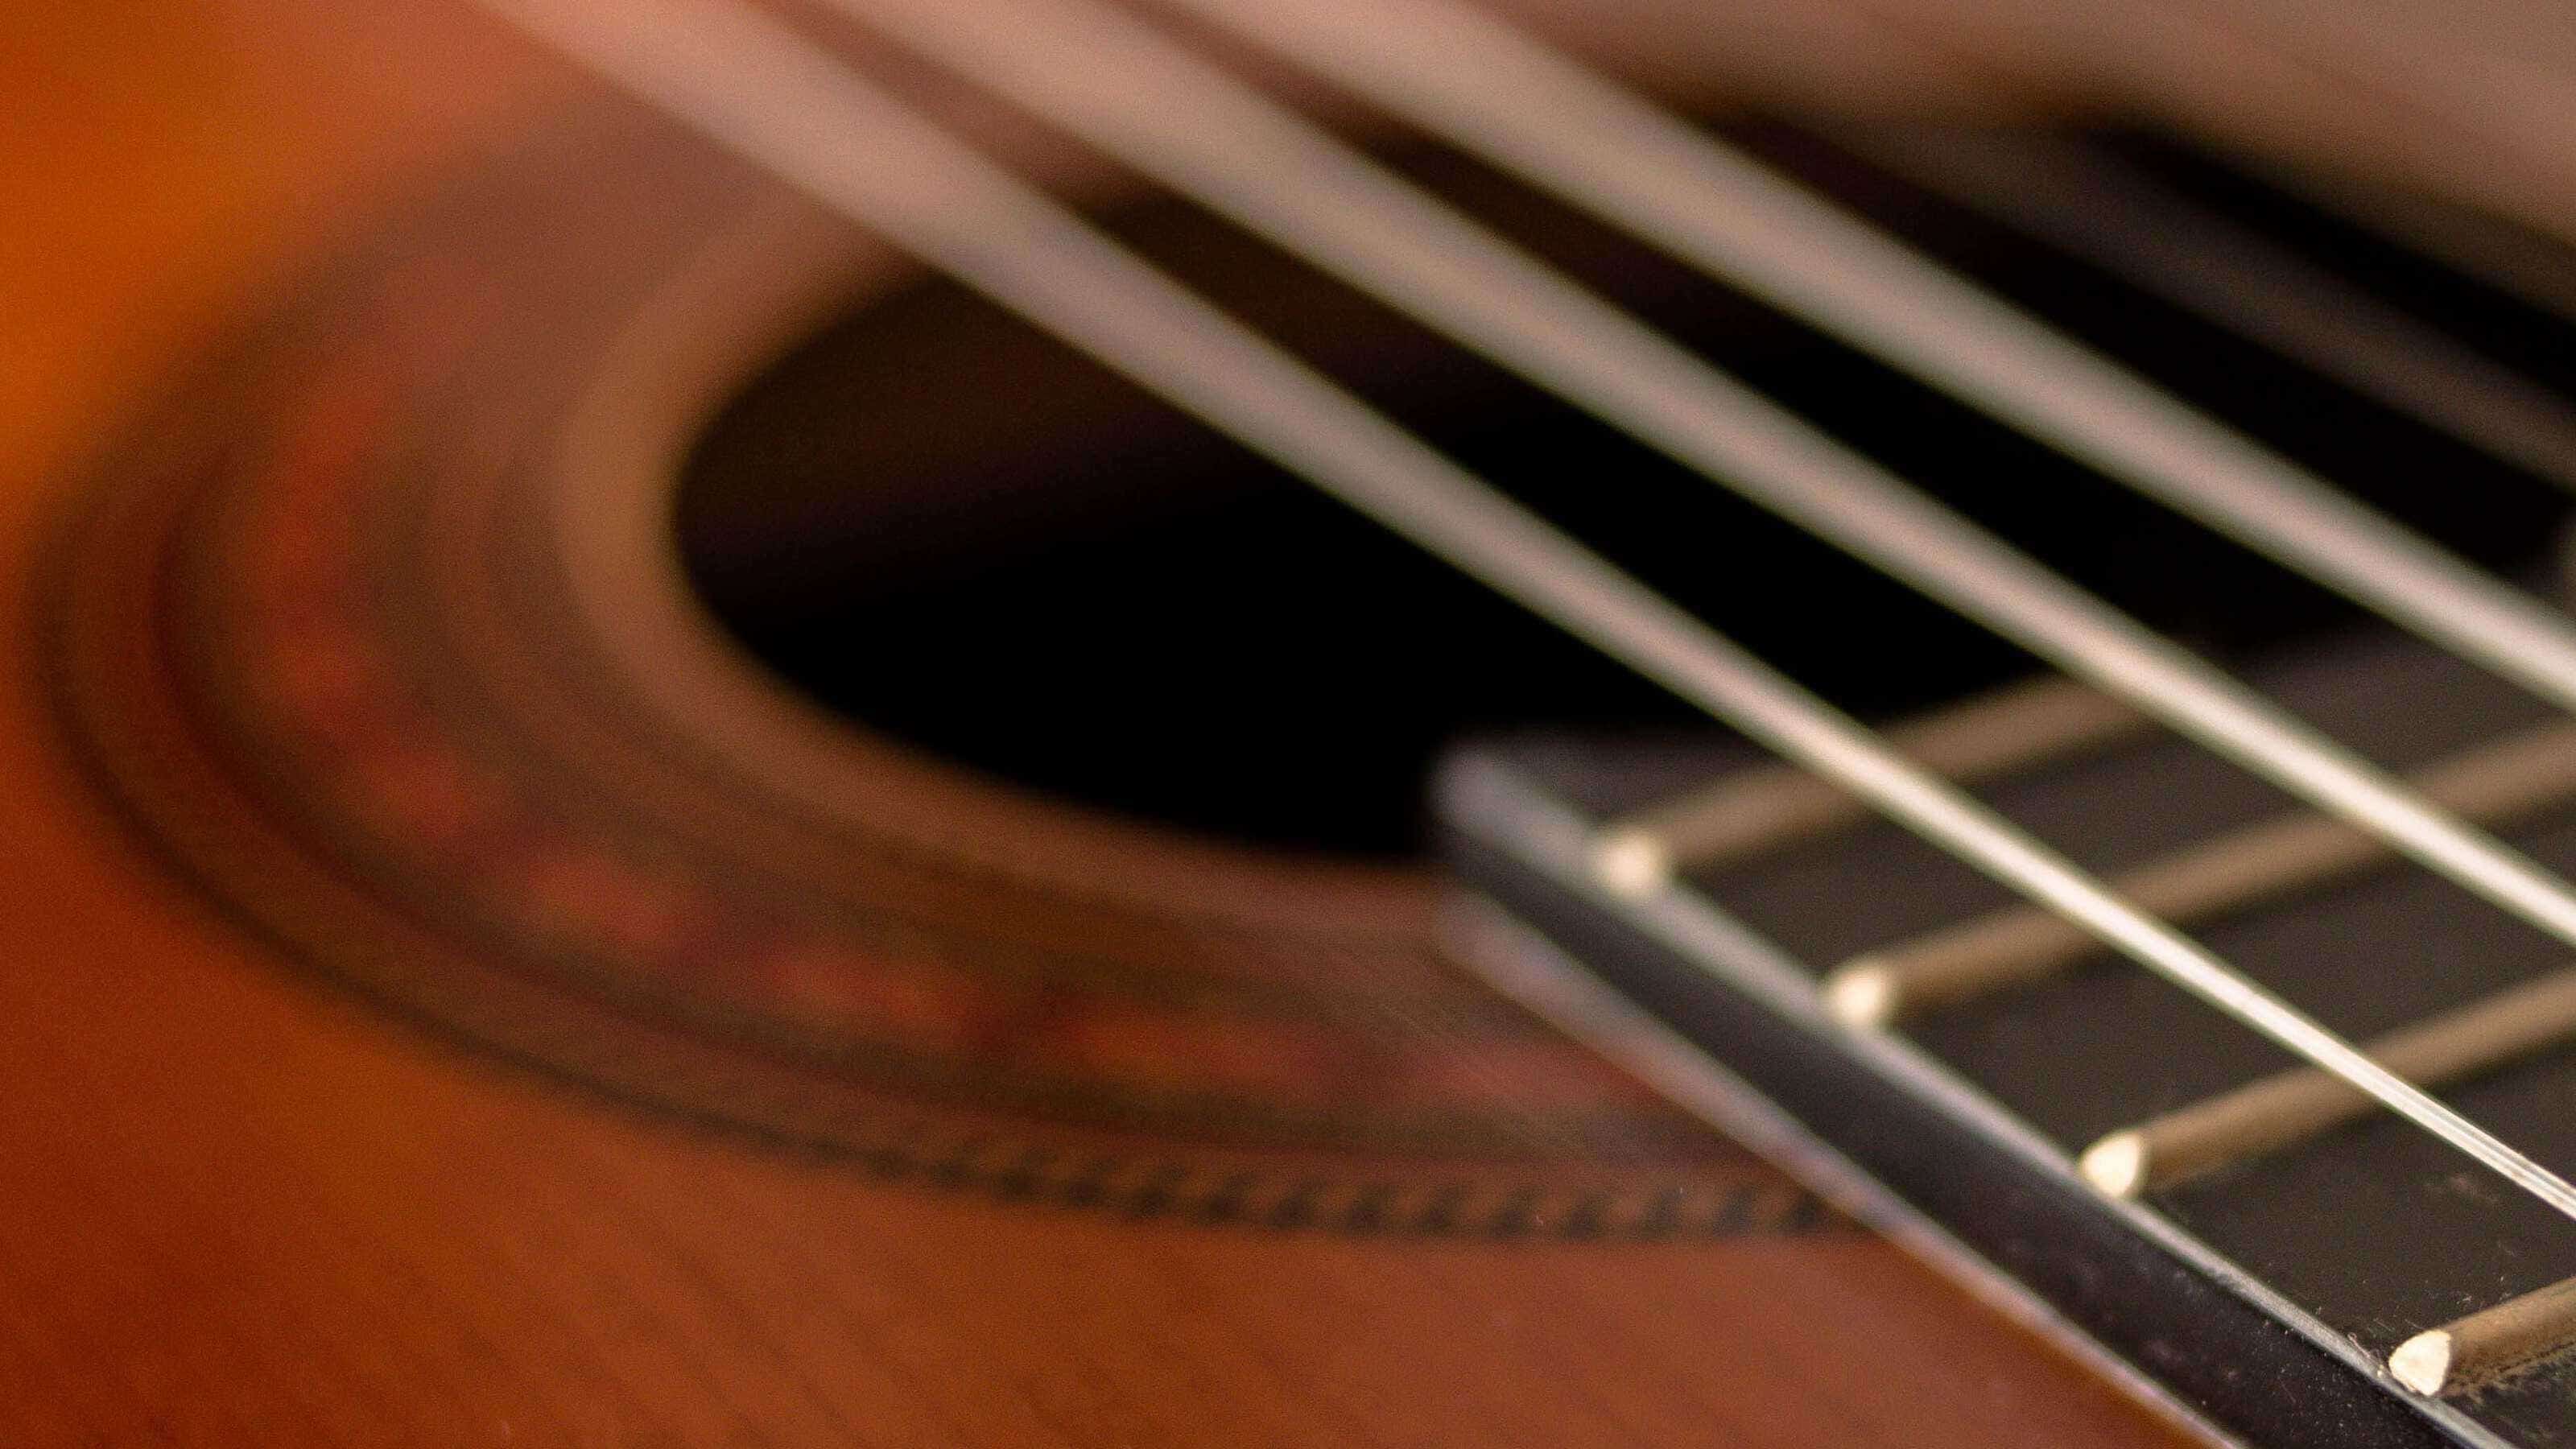 Guitar closeup. Image courtesy of the Sandisfield Arts Center.